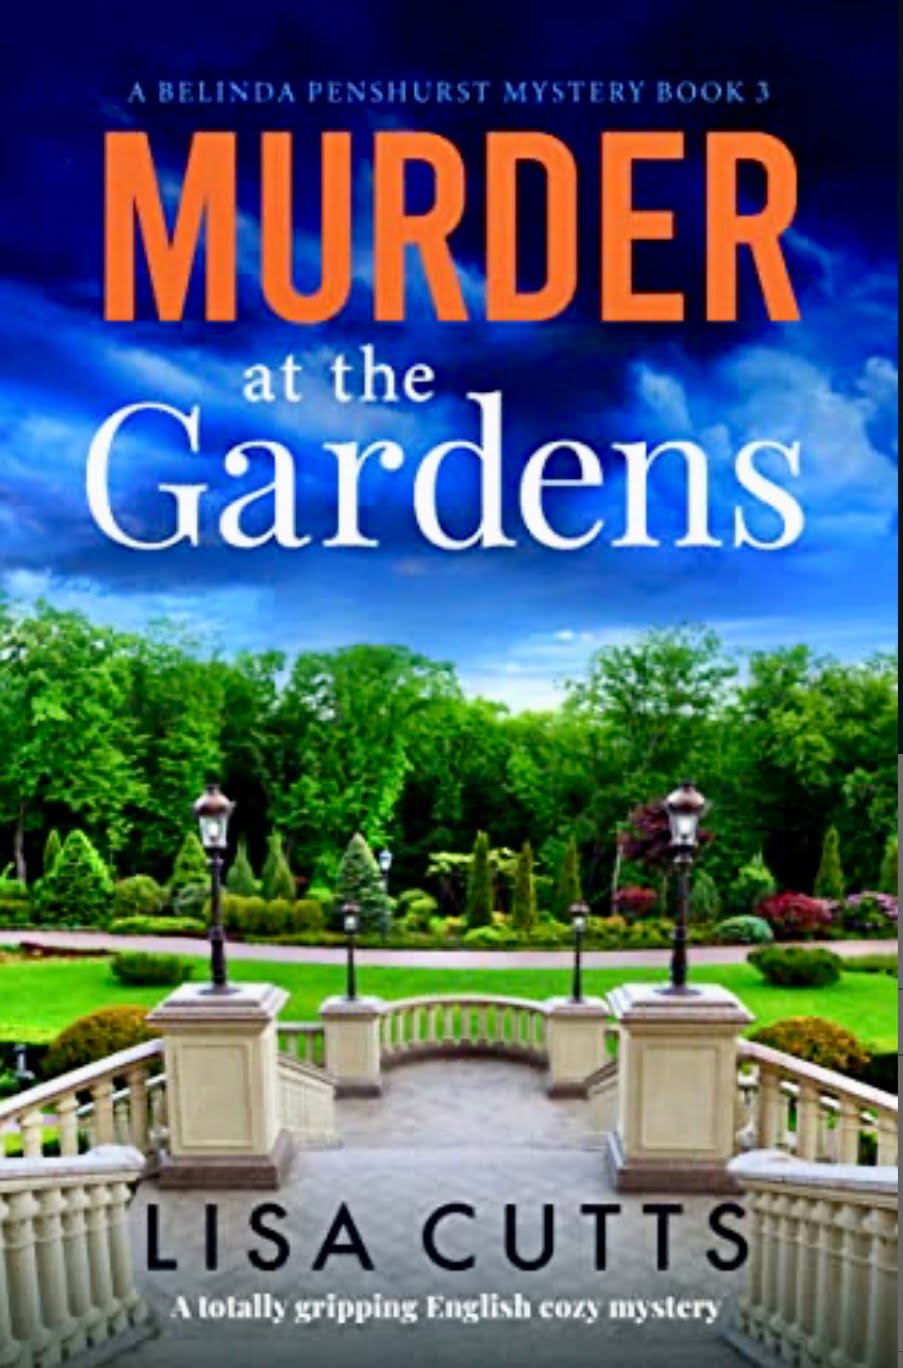 MURDER AT THE GARDENS BY LISA CUTTS – BOOK REVIEW